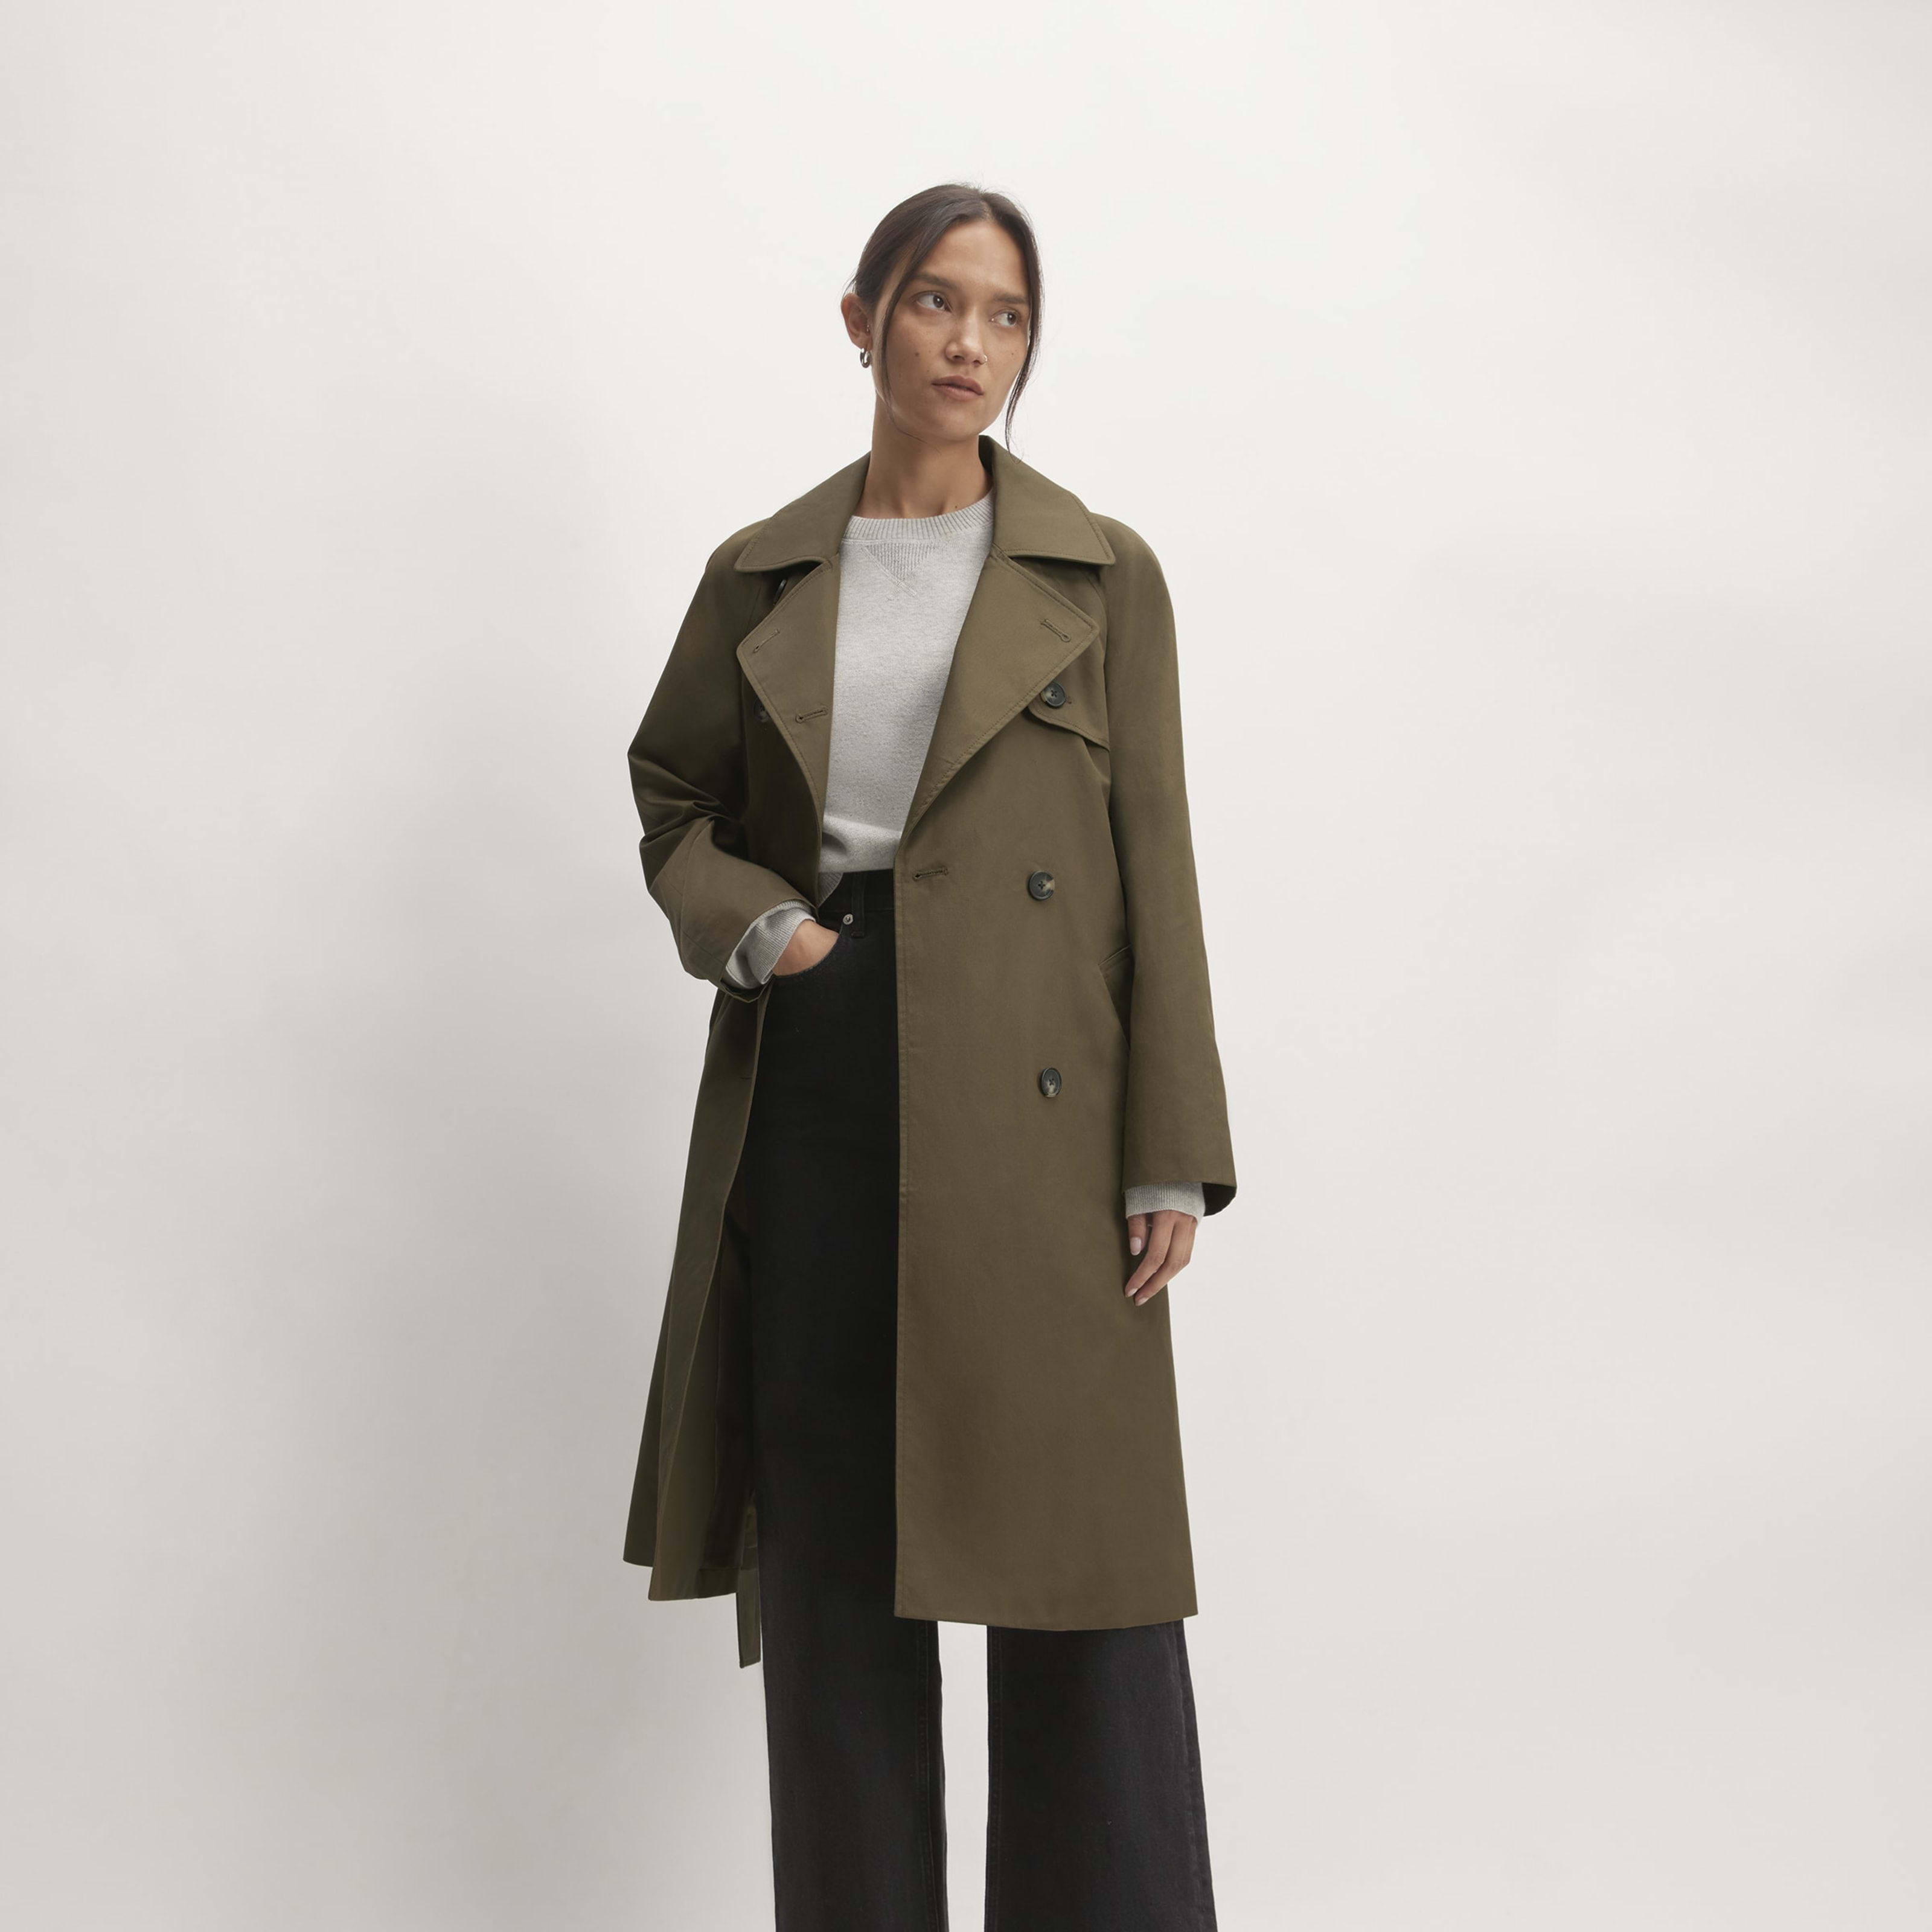 women's cotton modern trench coat by everlane in olive, size xs